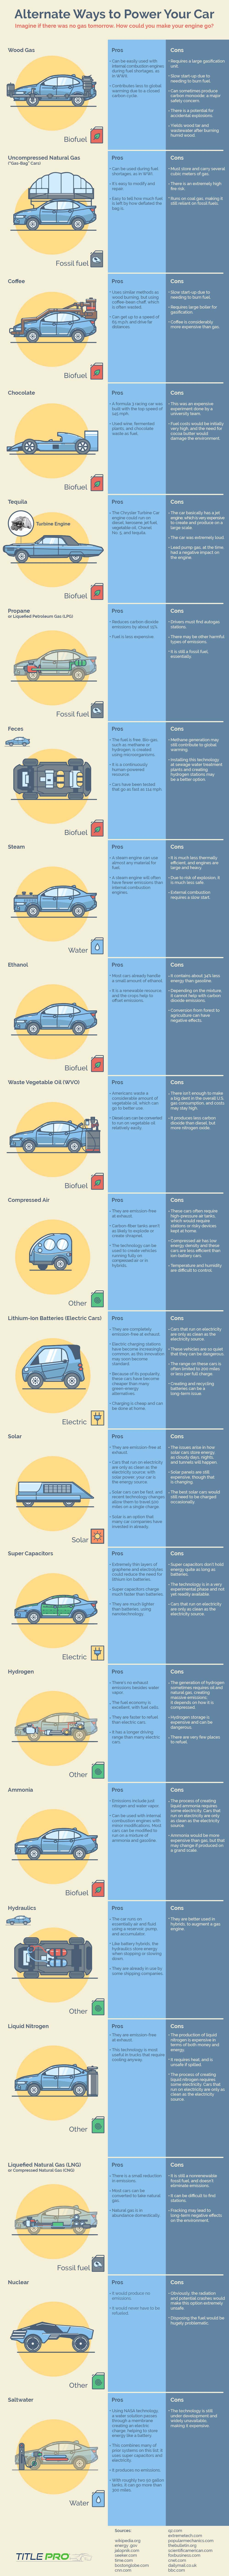 Alternate Ways to Power Your Car Infographic